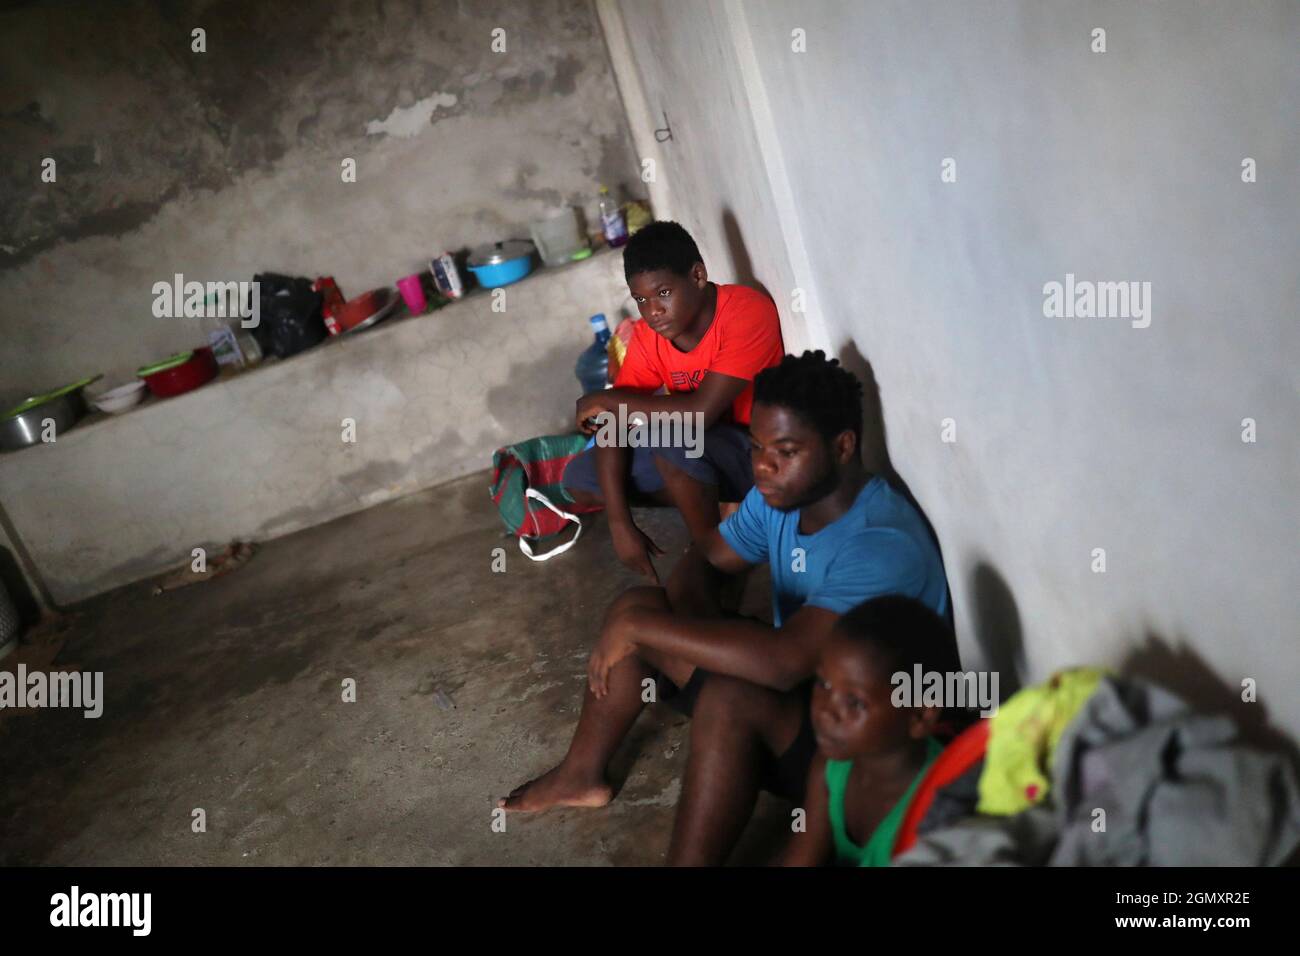 Migrants from Haiti rest inside a room as thousands of migrants arrive at the southern border with Guatemala and the U.S. border en masse, in Tapachula, Chiapas state, Mexico September 16, 2021. Picture taken September 16, 2021. REUTERS/Edgard Garrido Stock Photo